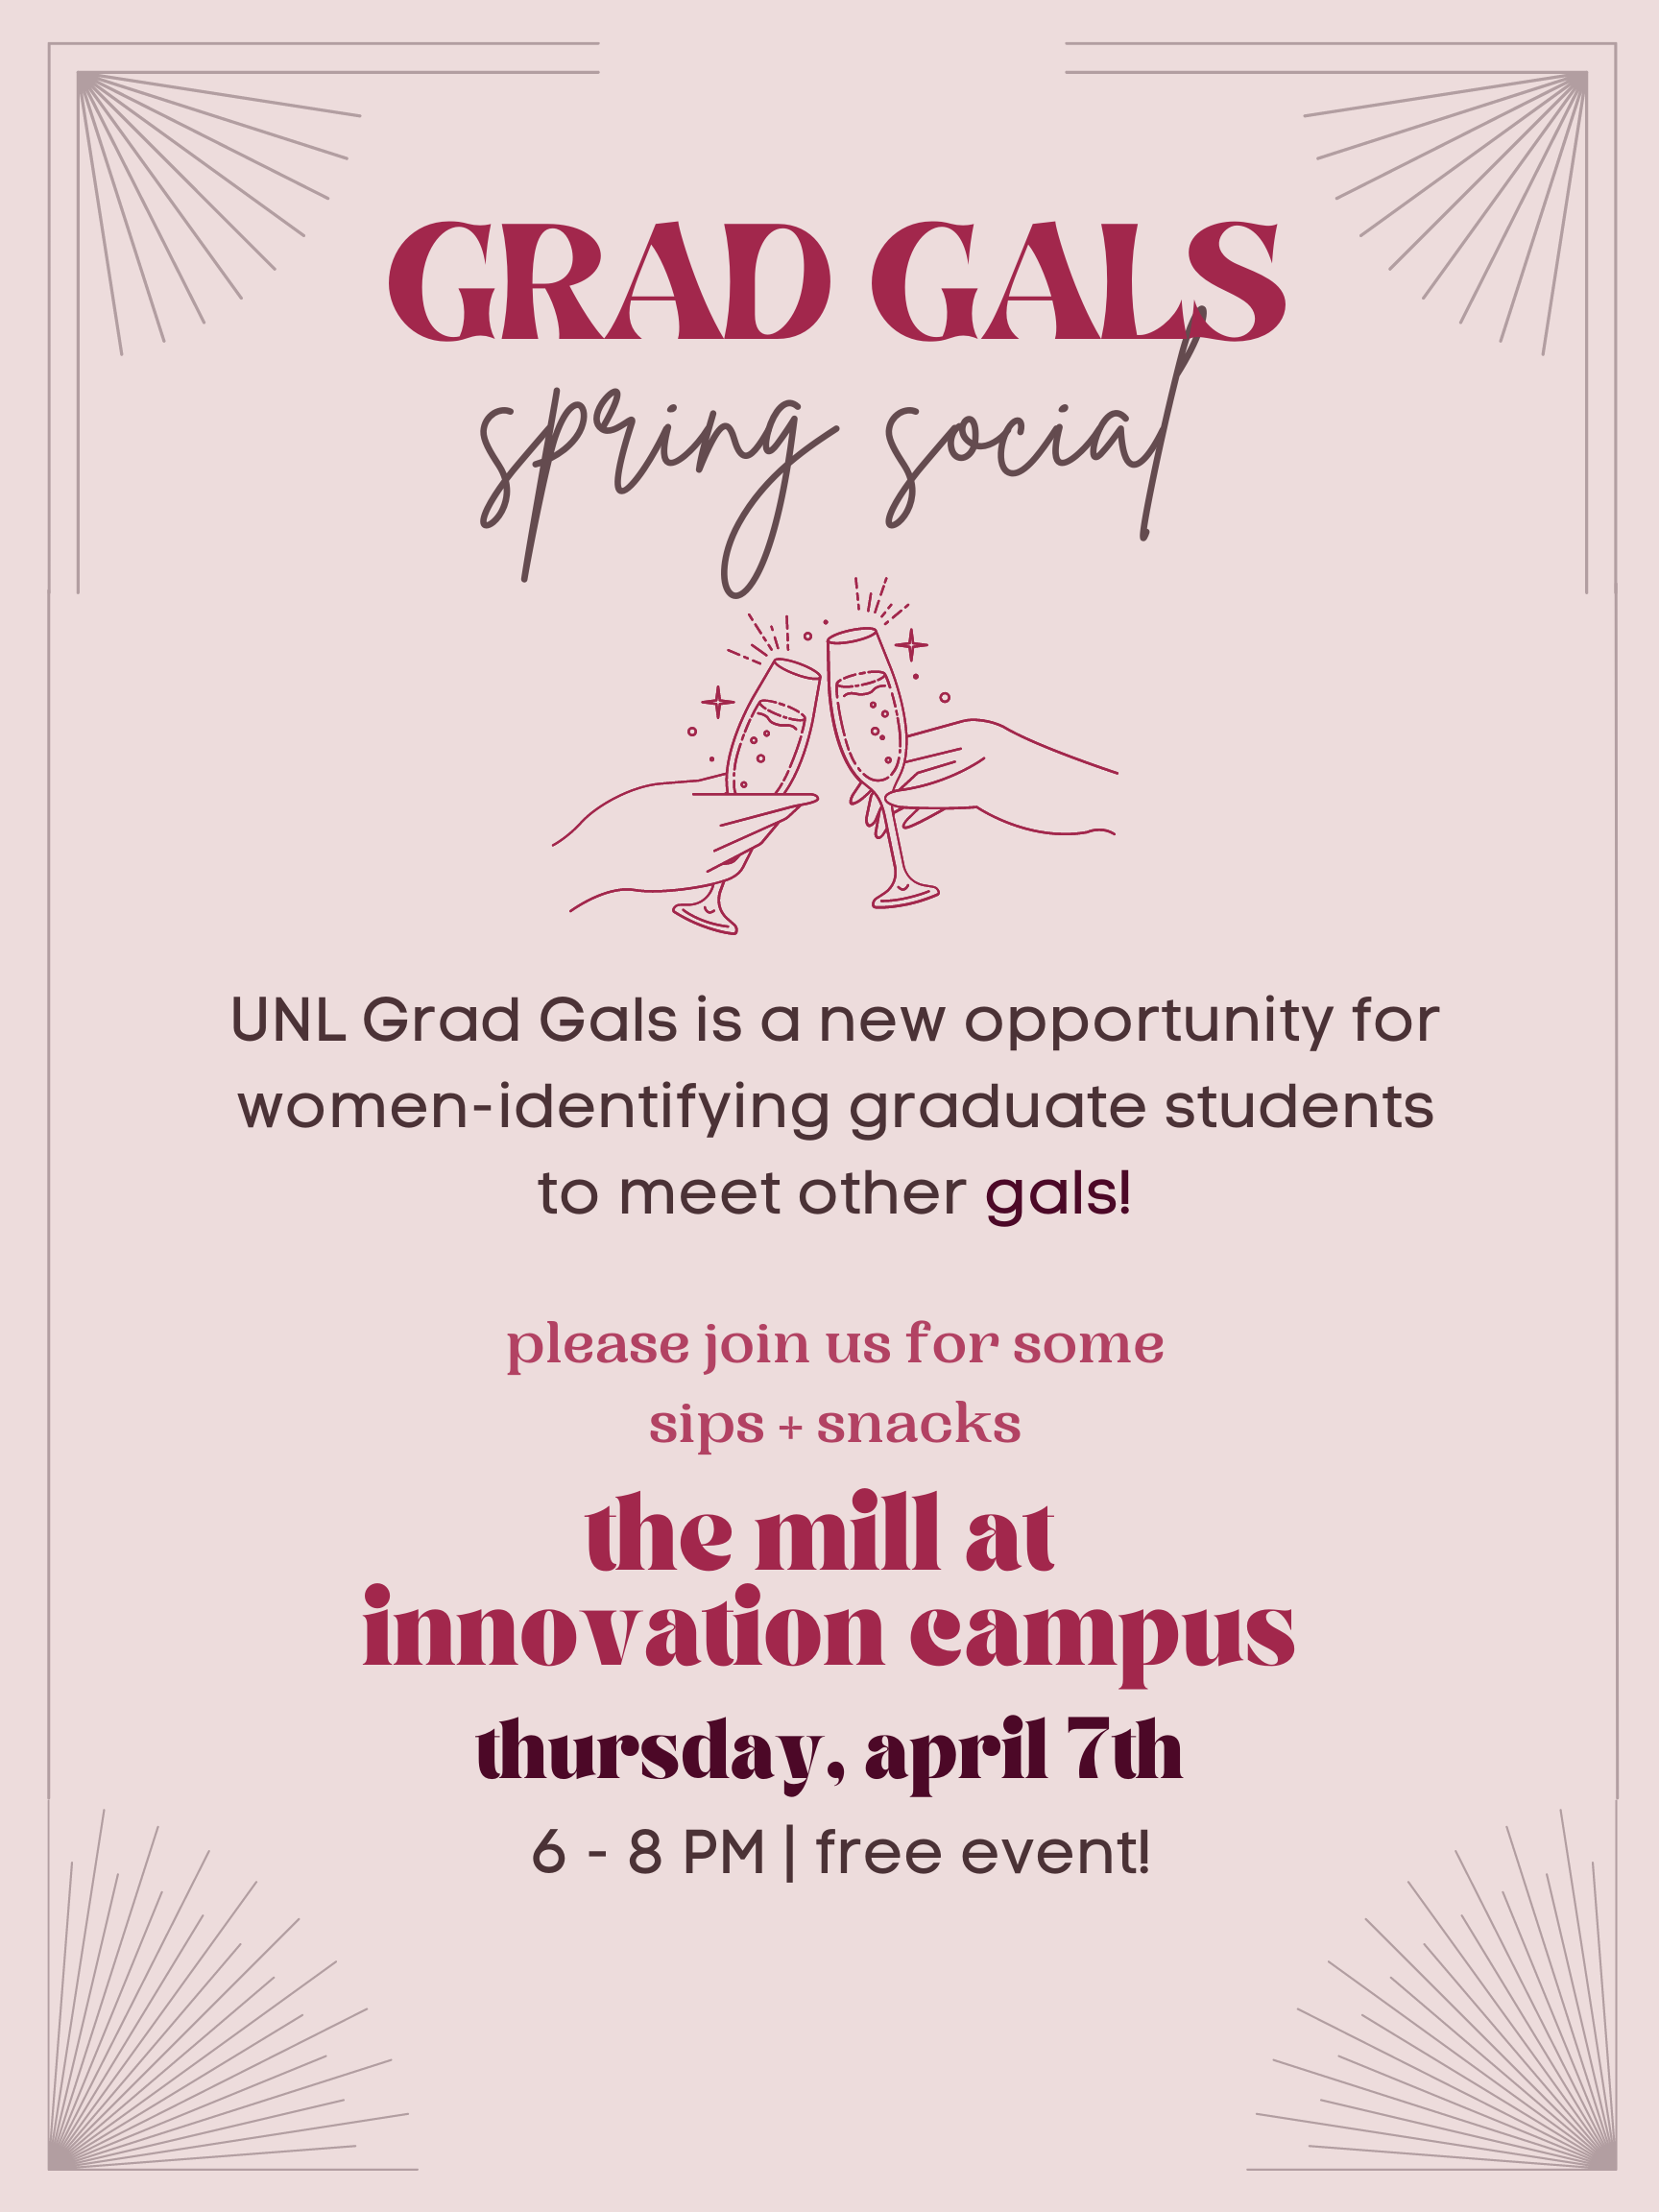 Are you a woman-identifying graduate student? Have you wanted to connect more with women on campus but don’t always have the opportunity to in your program?  Come to the Grad Gals Spring Social for an opportunity to snack, sip, and connect with other wome